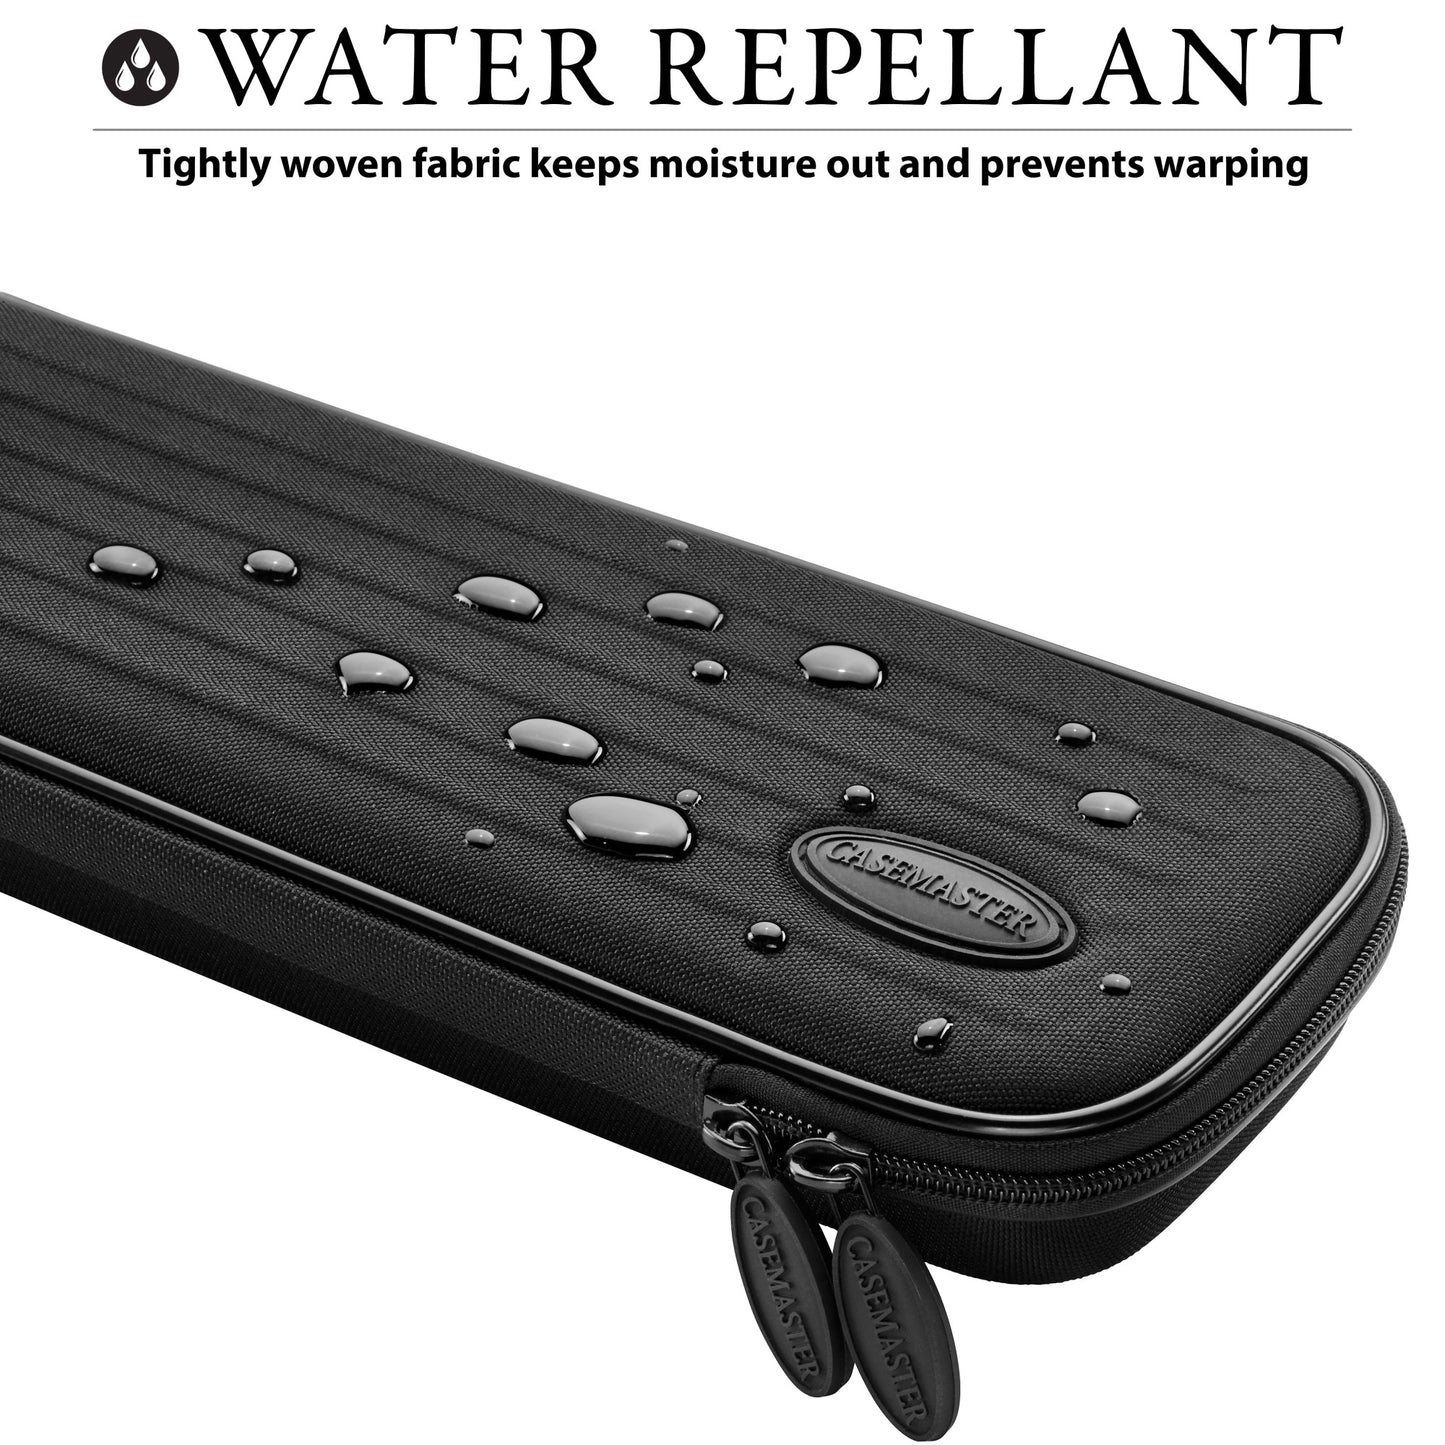 Casemaster Parallax Cue Case Black showing the water-repellant features